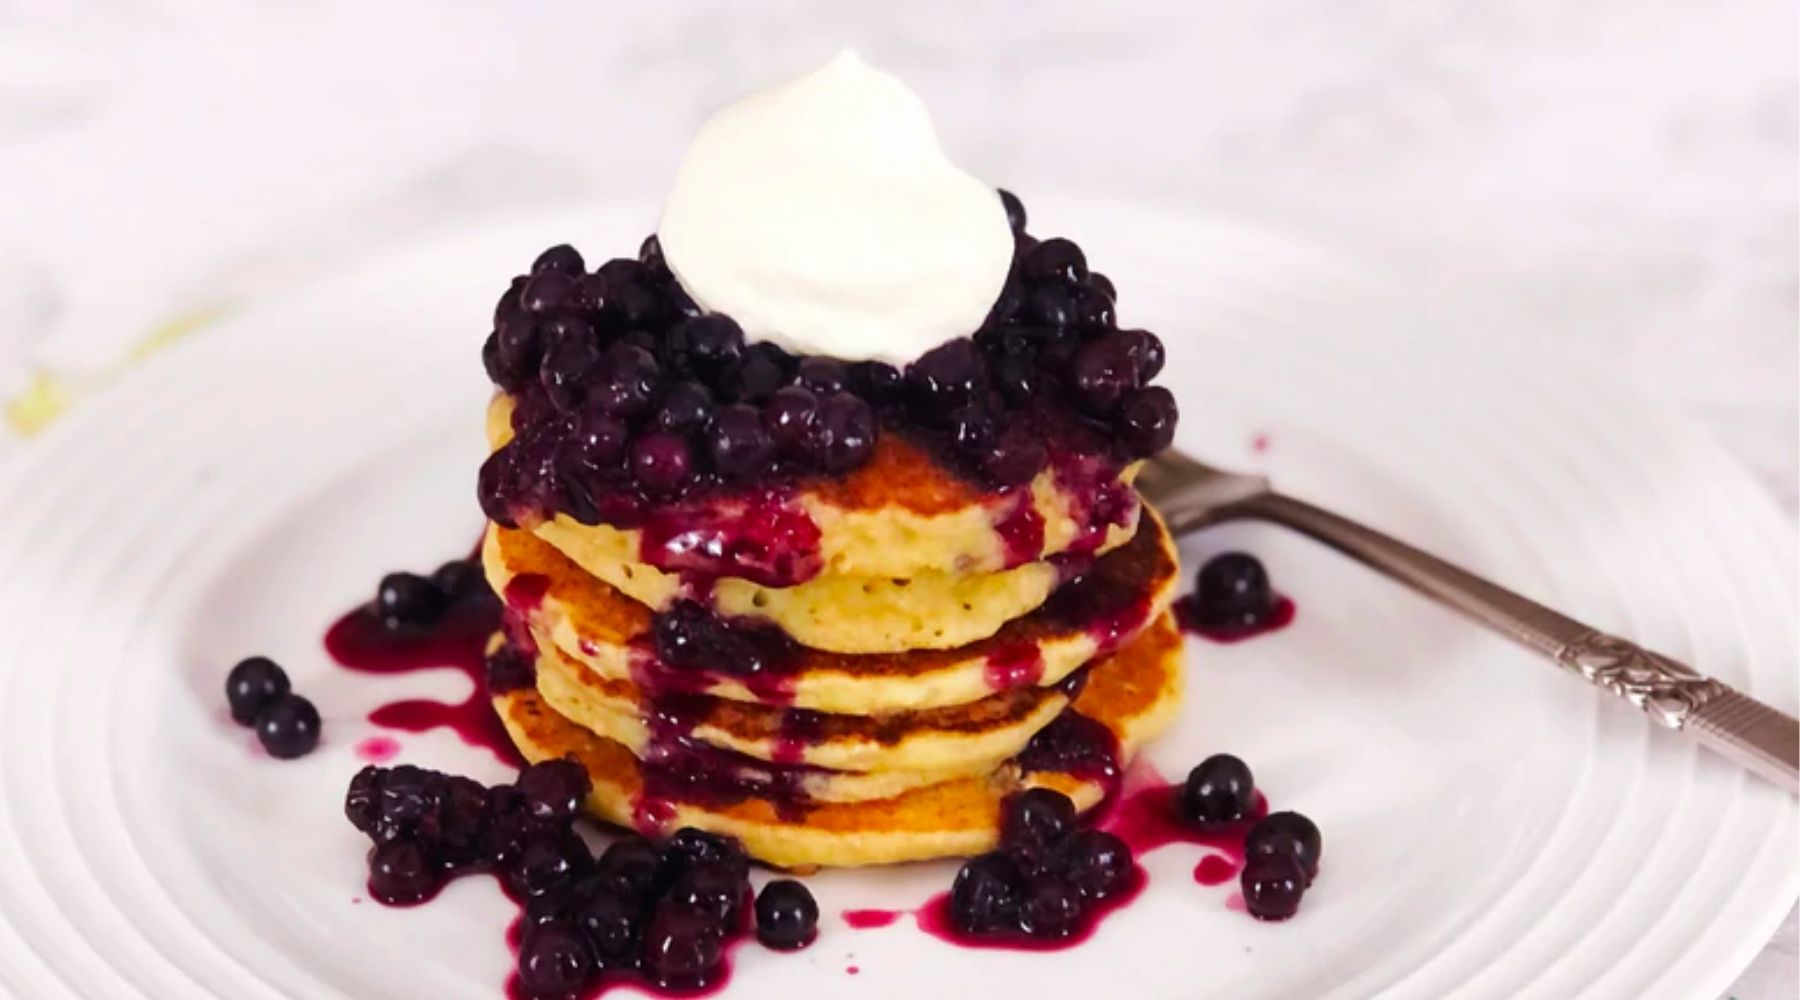 Wild Blueberry Lemon Ricotta Pancakes on a white plate with whipped cream and a fruit patterned table cloth.